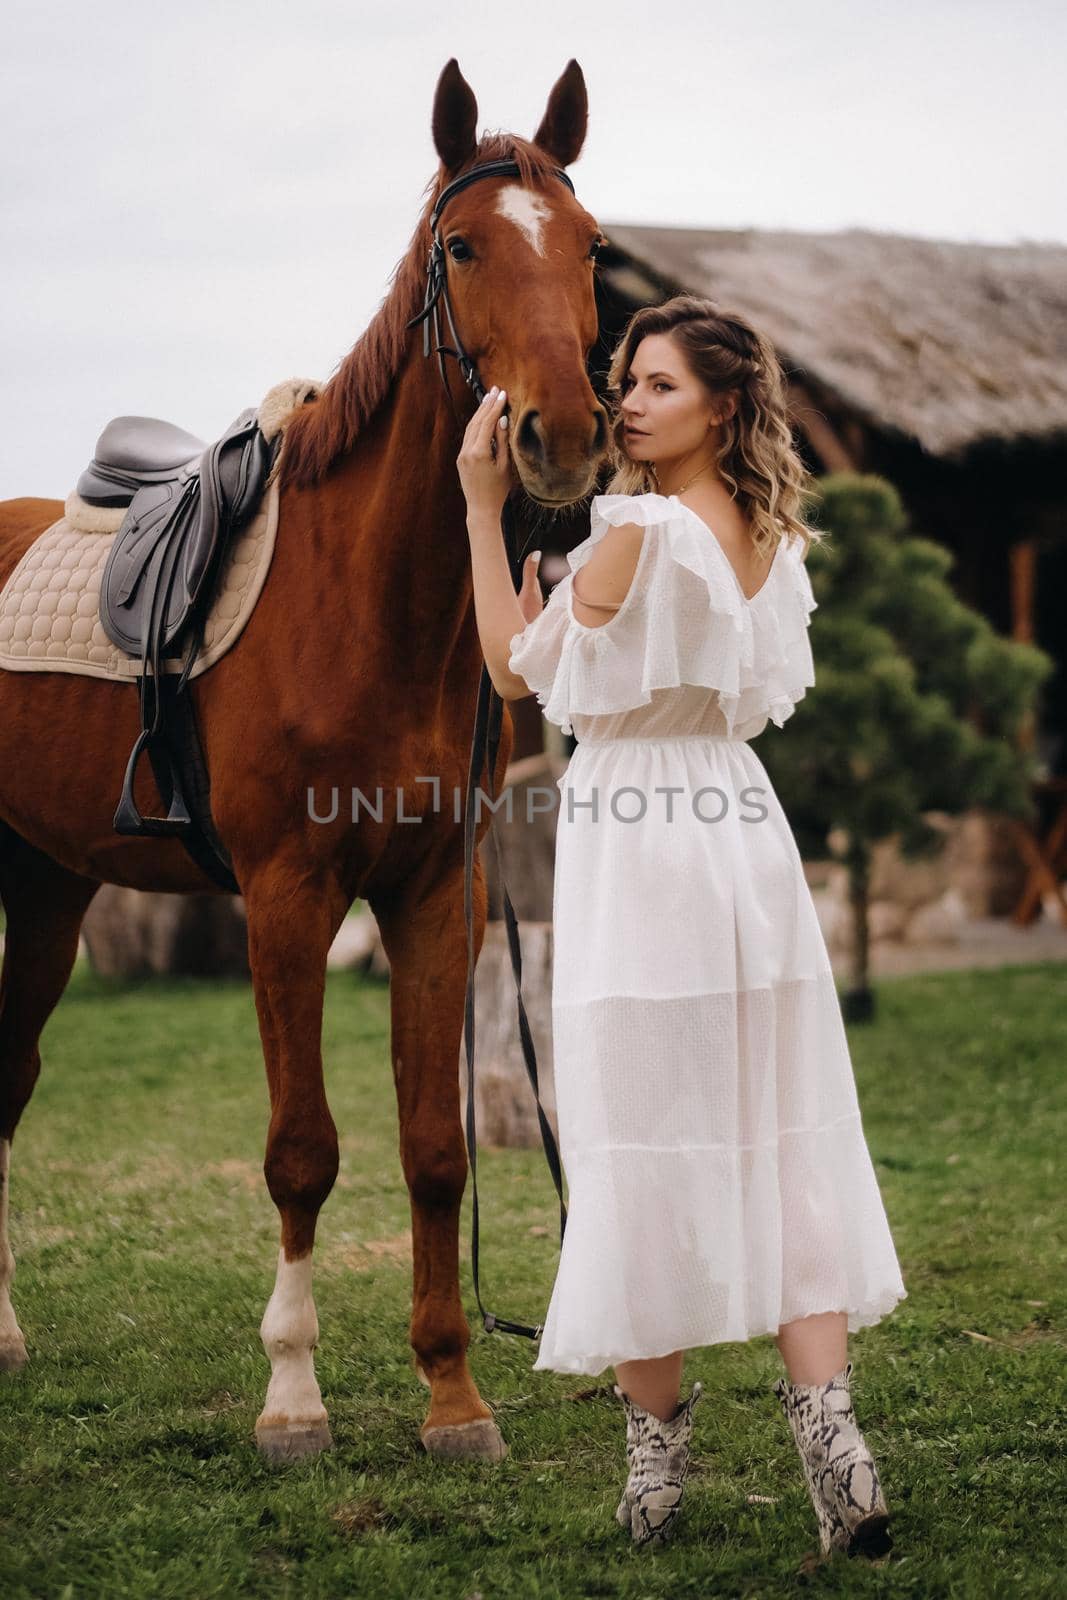 Beautiful girl in a white sundress next to a horse on an old ranch.